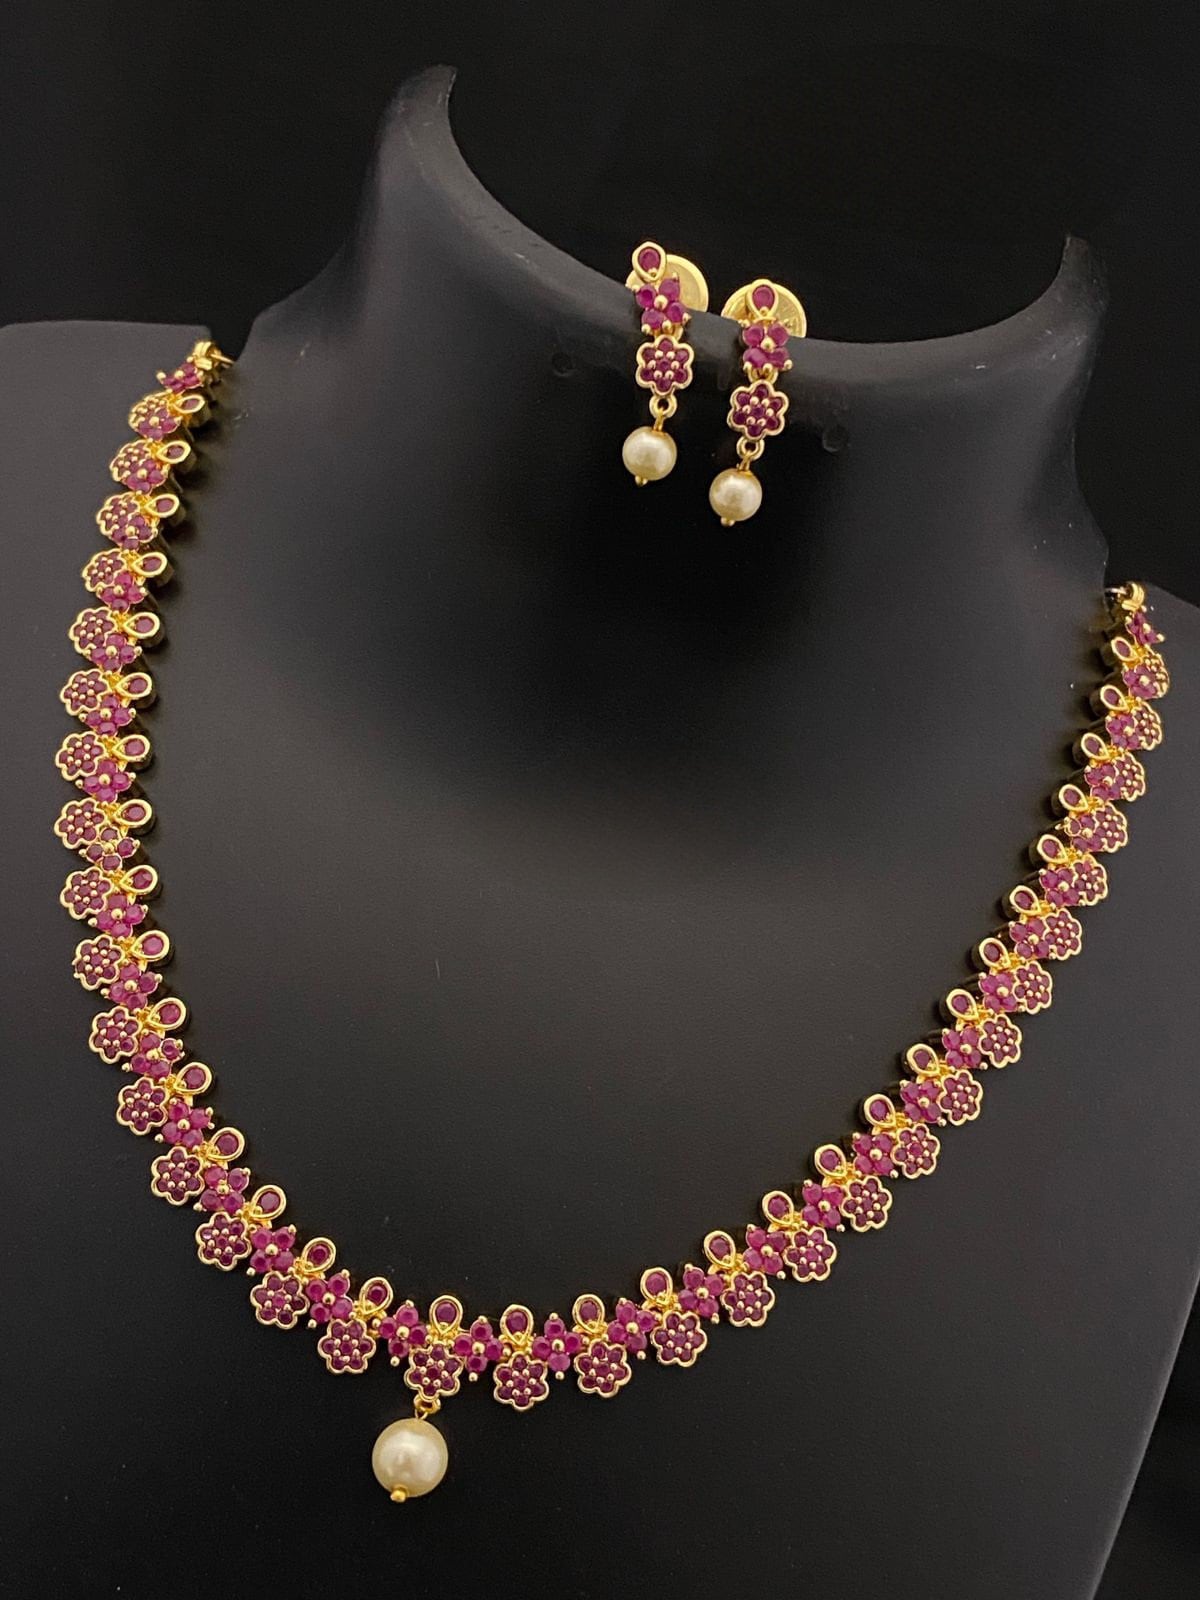 Gold Plated CZ crystal American diamond Floral choker Necklace Earring Set |Small AD choker set | Multicolor fashion Jewelry set for women